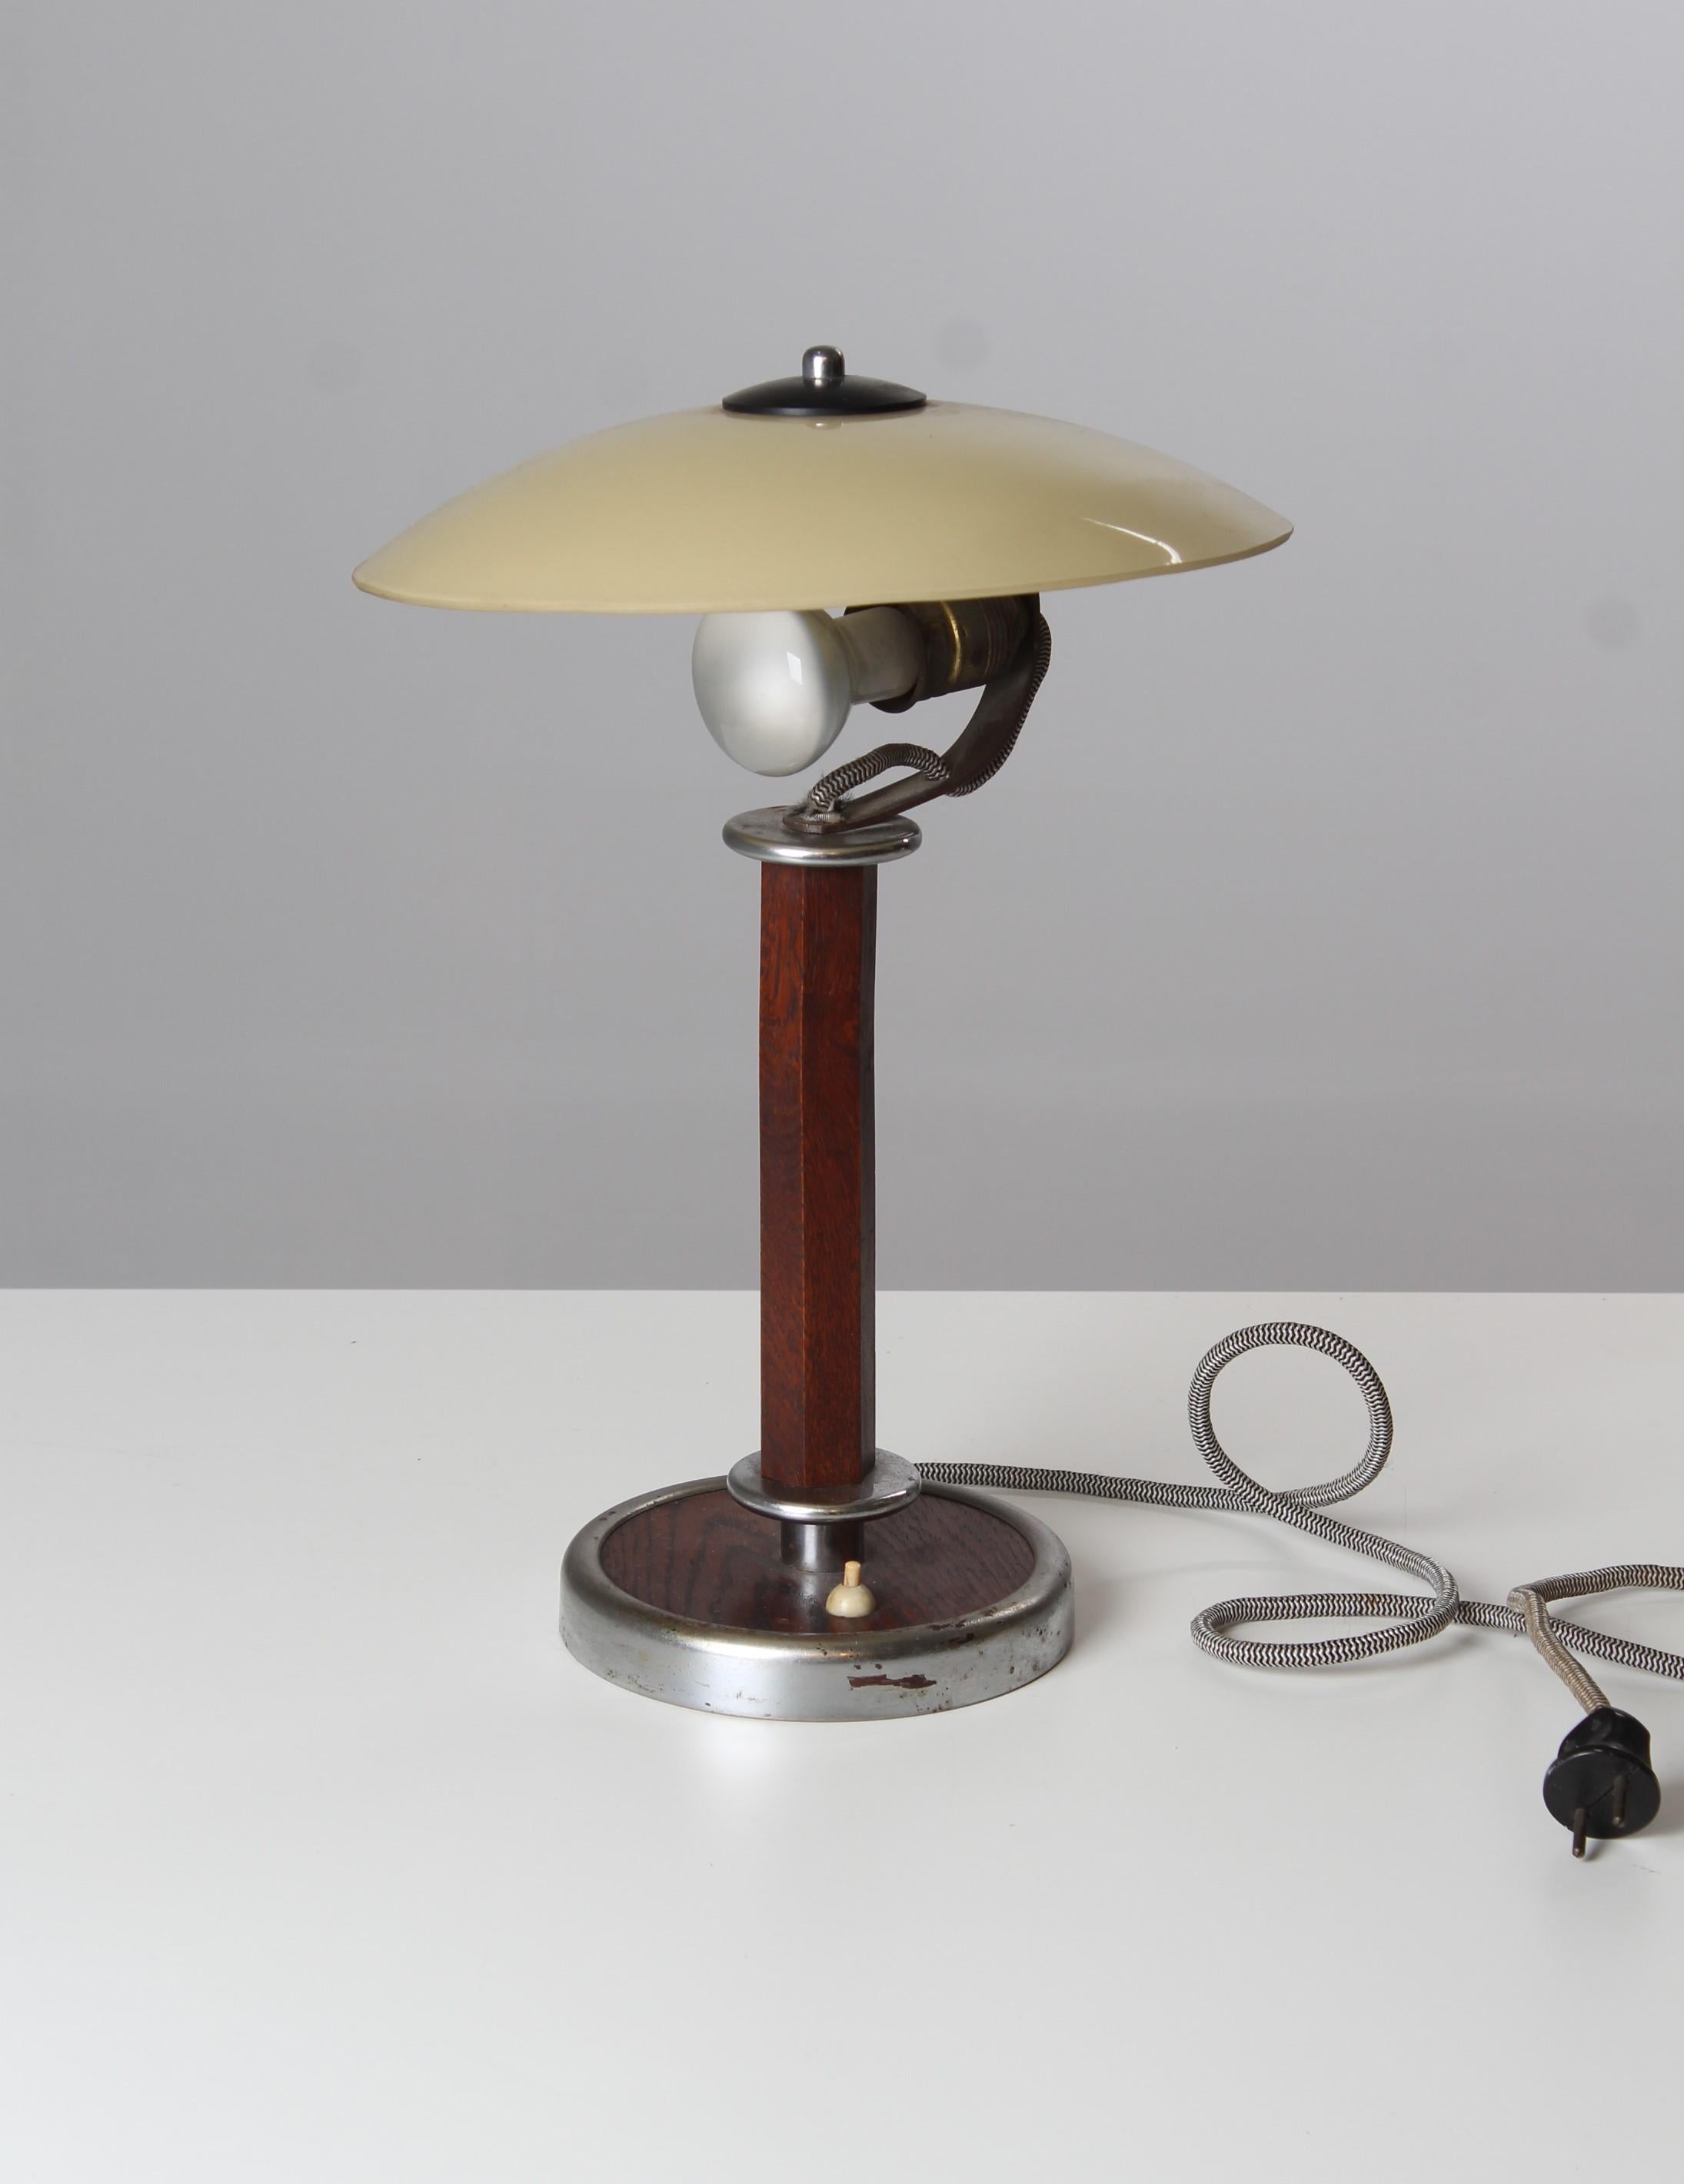 Original Art Deco desk lamp from the 1920s or 1930s. Authentic condition with signs of age and use.
Good working condition. 

Measures: height: 42 cm, diameter: 31 cm.